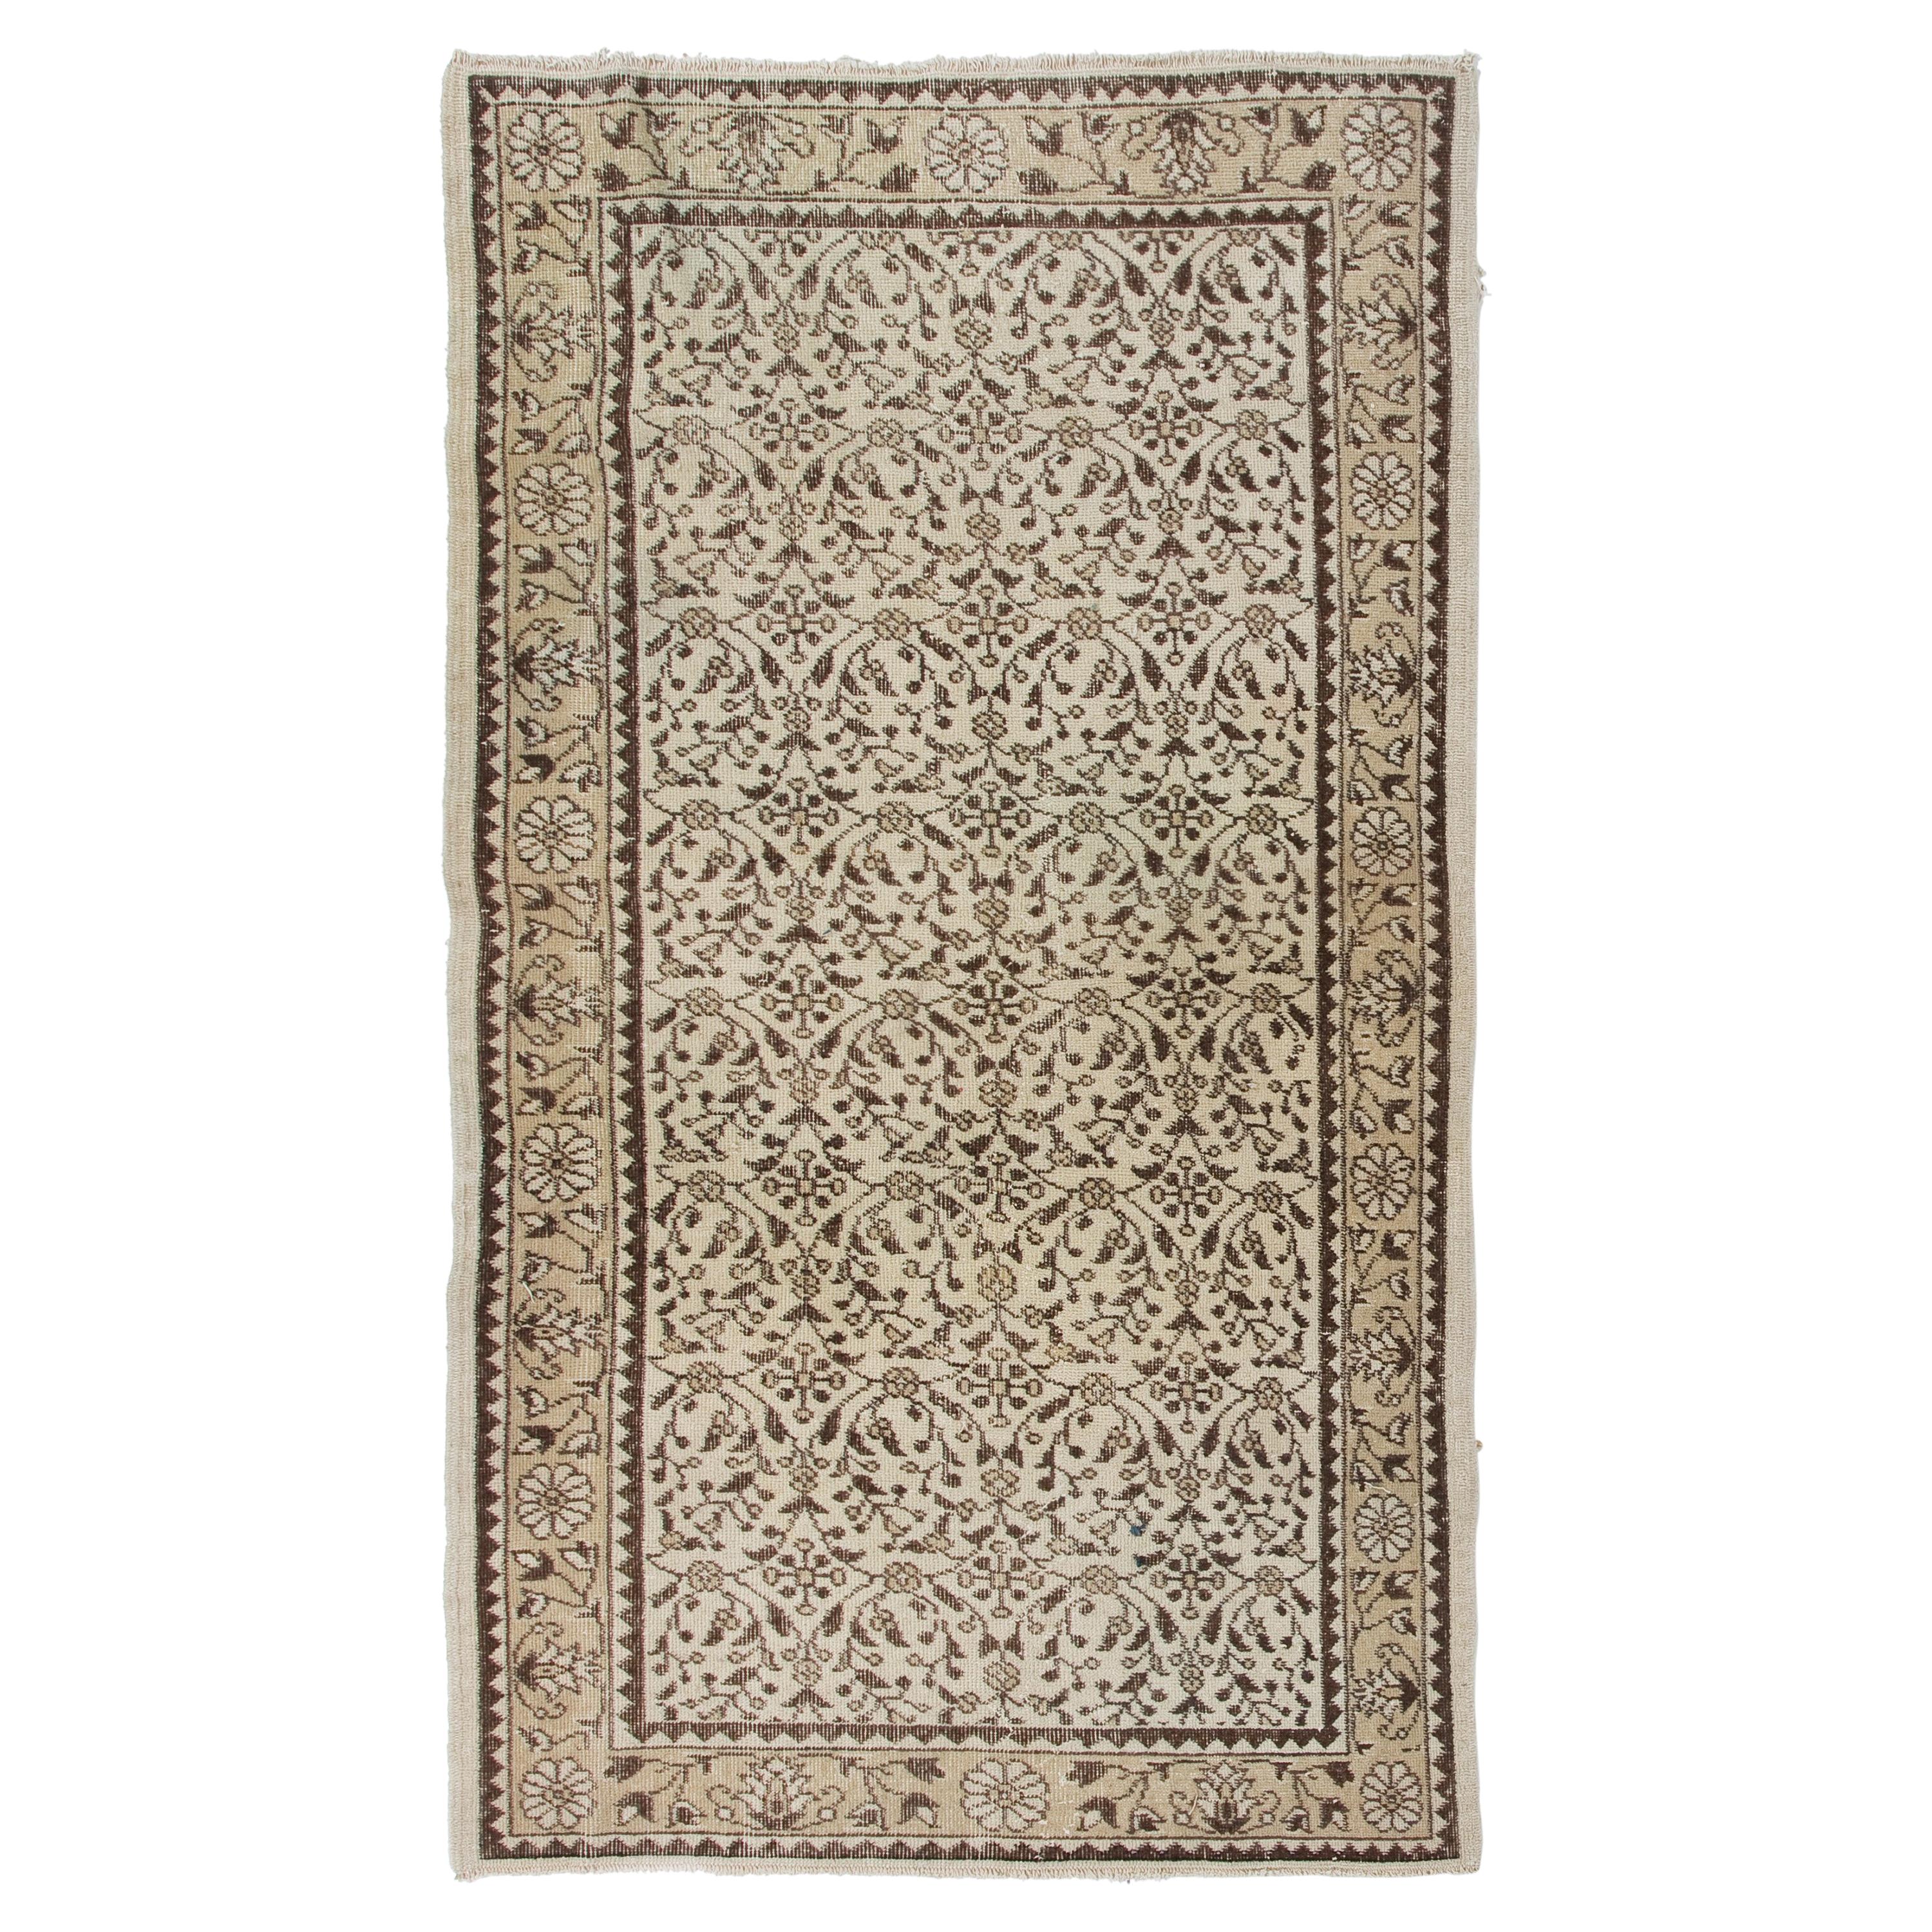 4x7 Ft Vintage Floral Distressed Hand-Knotted Wool Accent Rug in Brown, Beige